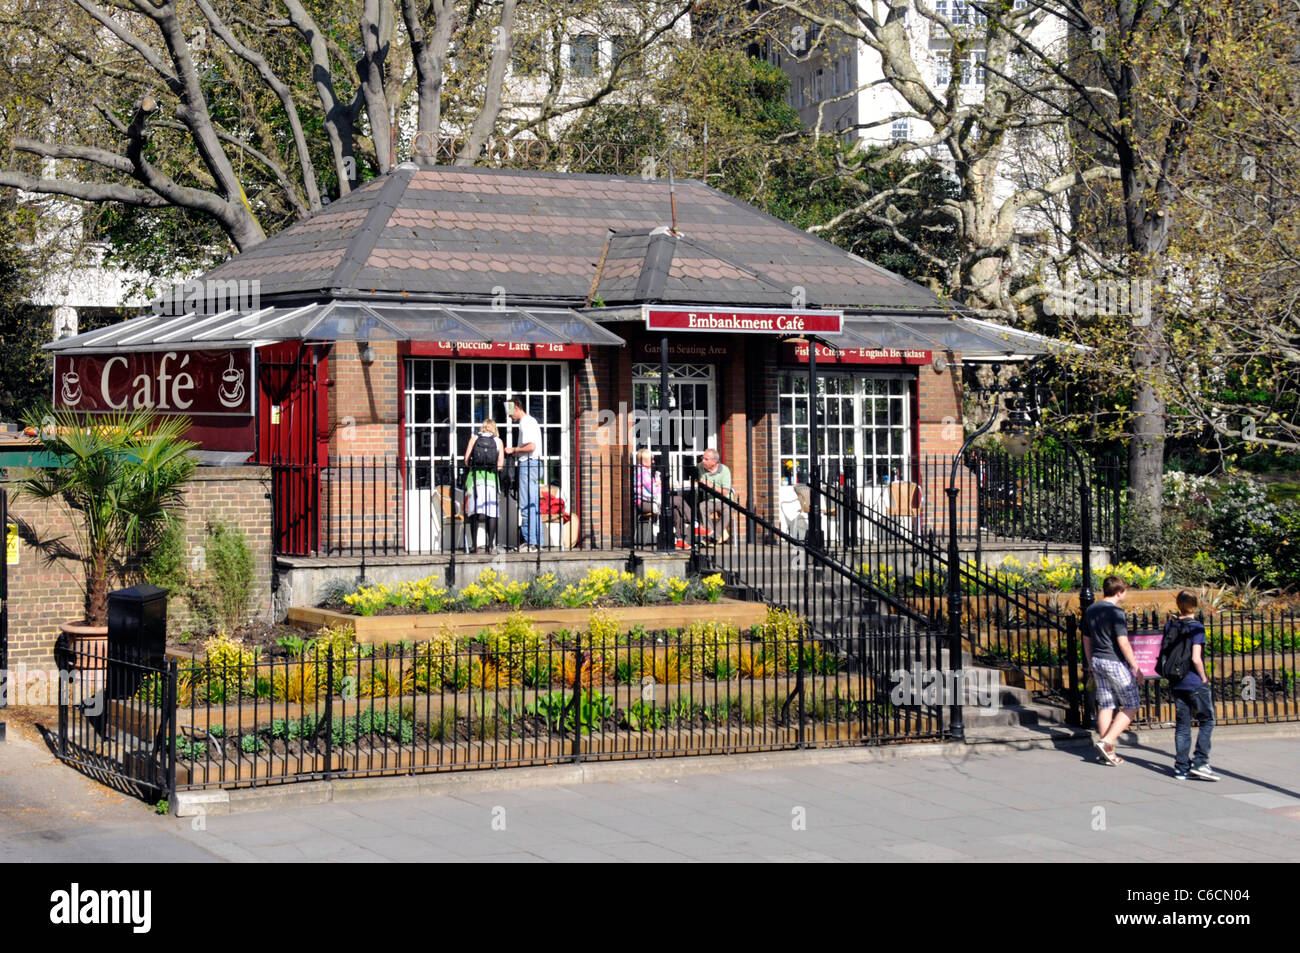 London street scene steps up from the main road to exterior & front of The Embankment Cafe within the Victoria Embankment Gardens London England UK Stock Photo